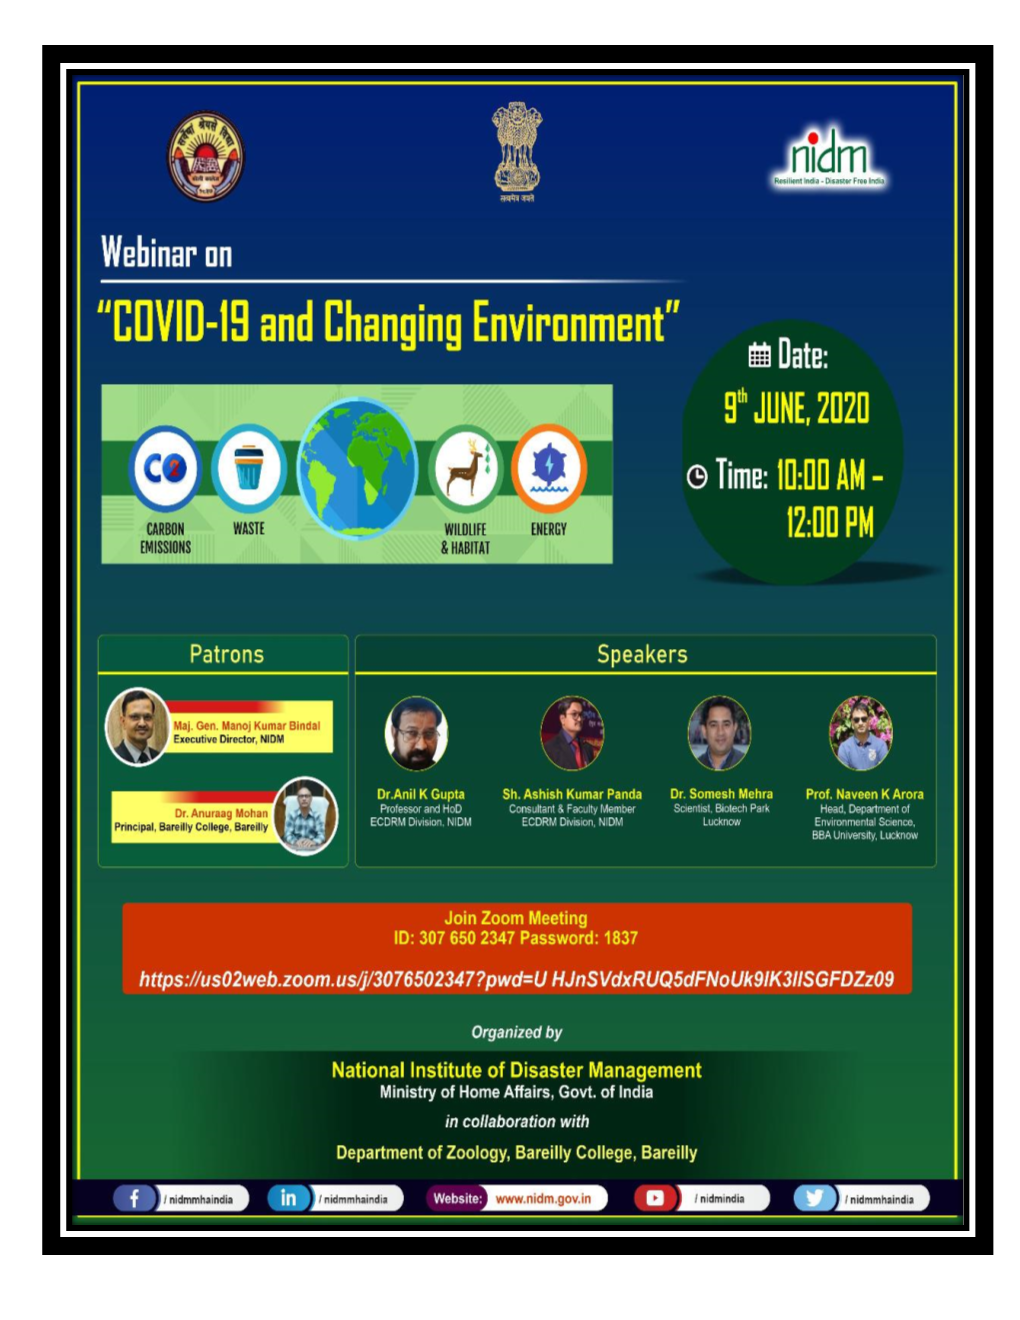 Covid-19 and Changing Environment”